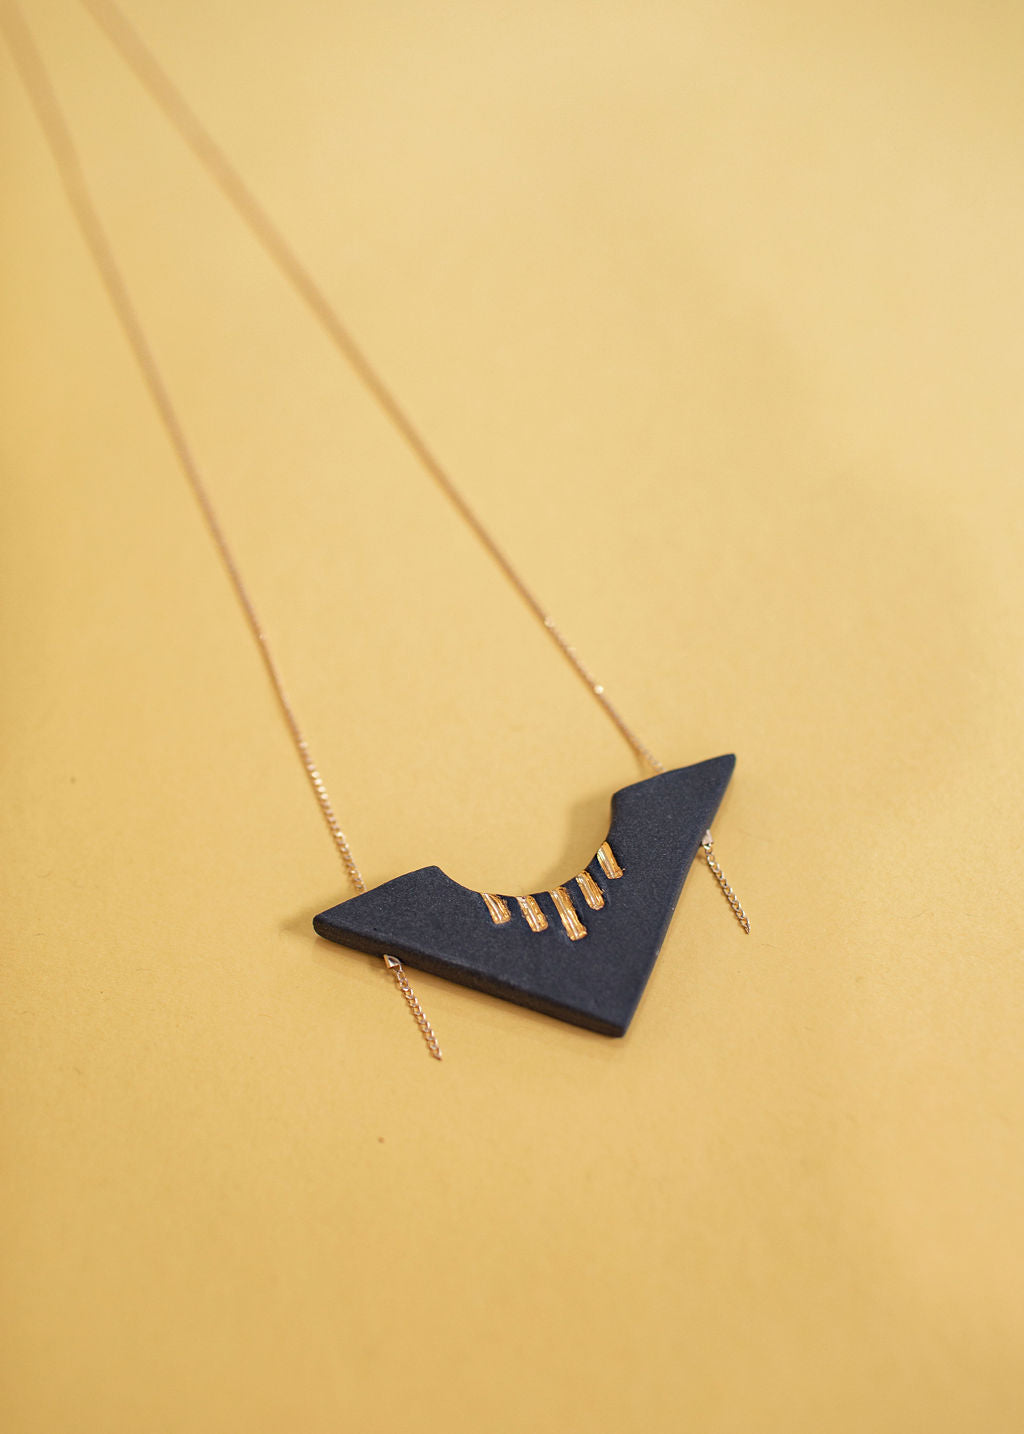 Photo of a obsidian necklace with a dainty gold chain attached. Porcelain pendant in the shape of an arrow with gold glaze accents on the top. 